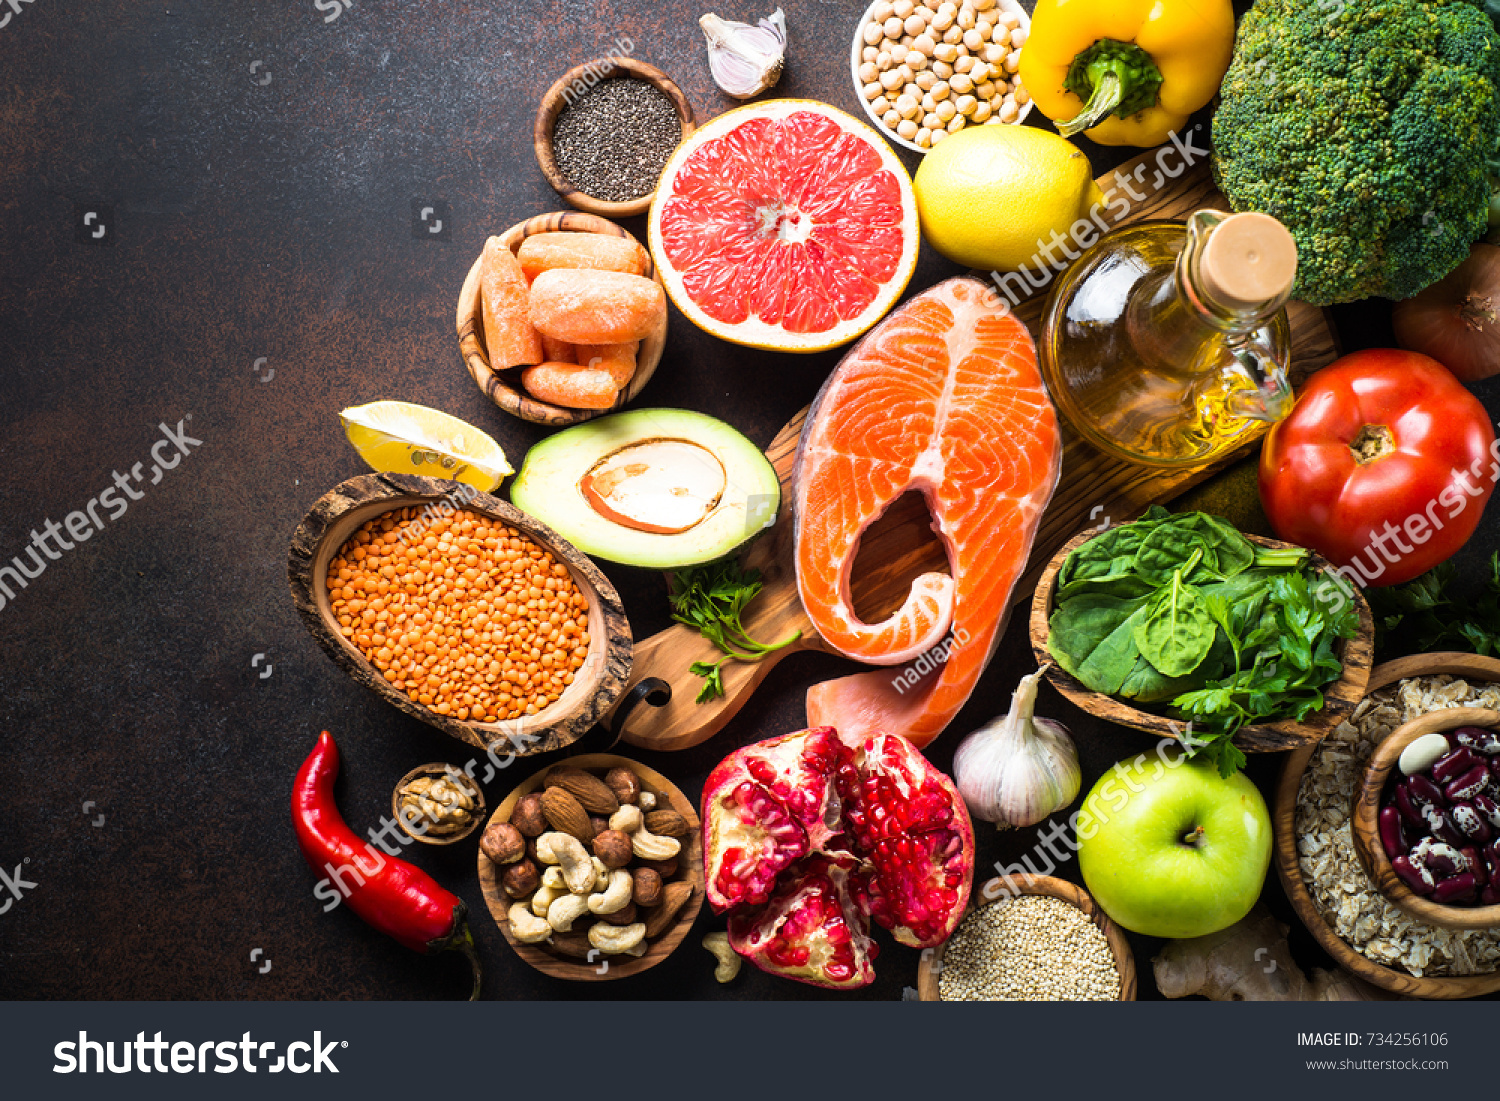 Balanced diet food background. Organic food for healthy nutrition, superfoods. Meat, fish, legumes,  nuts, seeds, greens, oil and vegetables. Top view copy space on dark stone table. #734256106